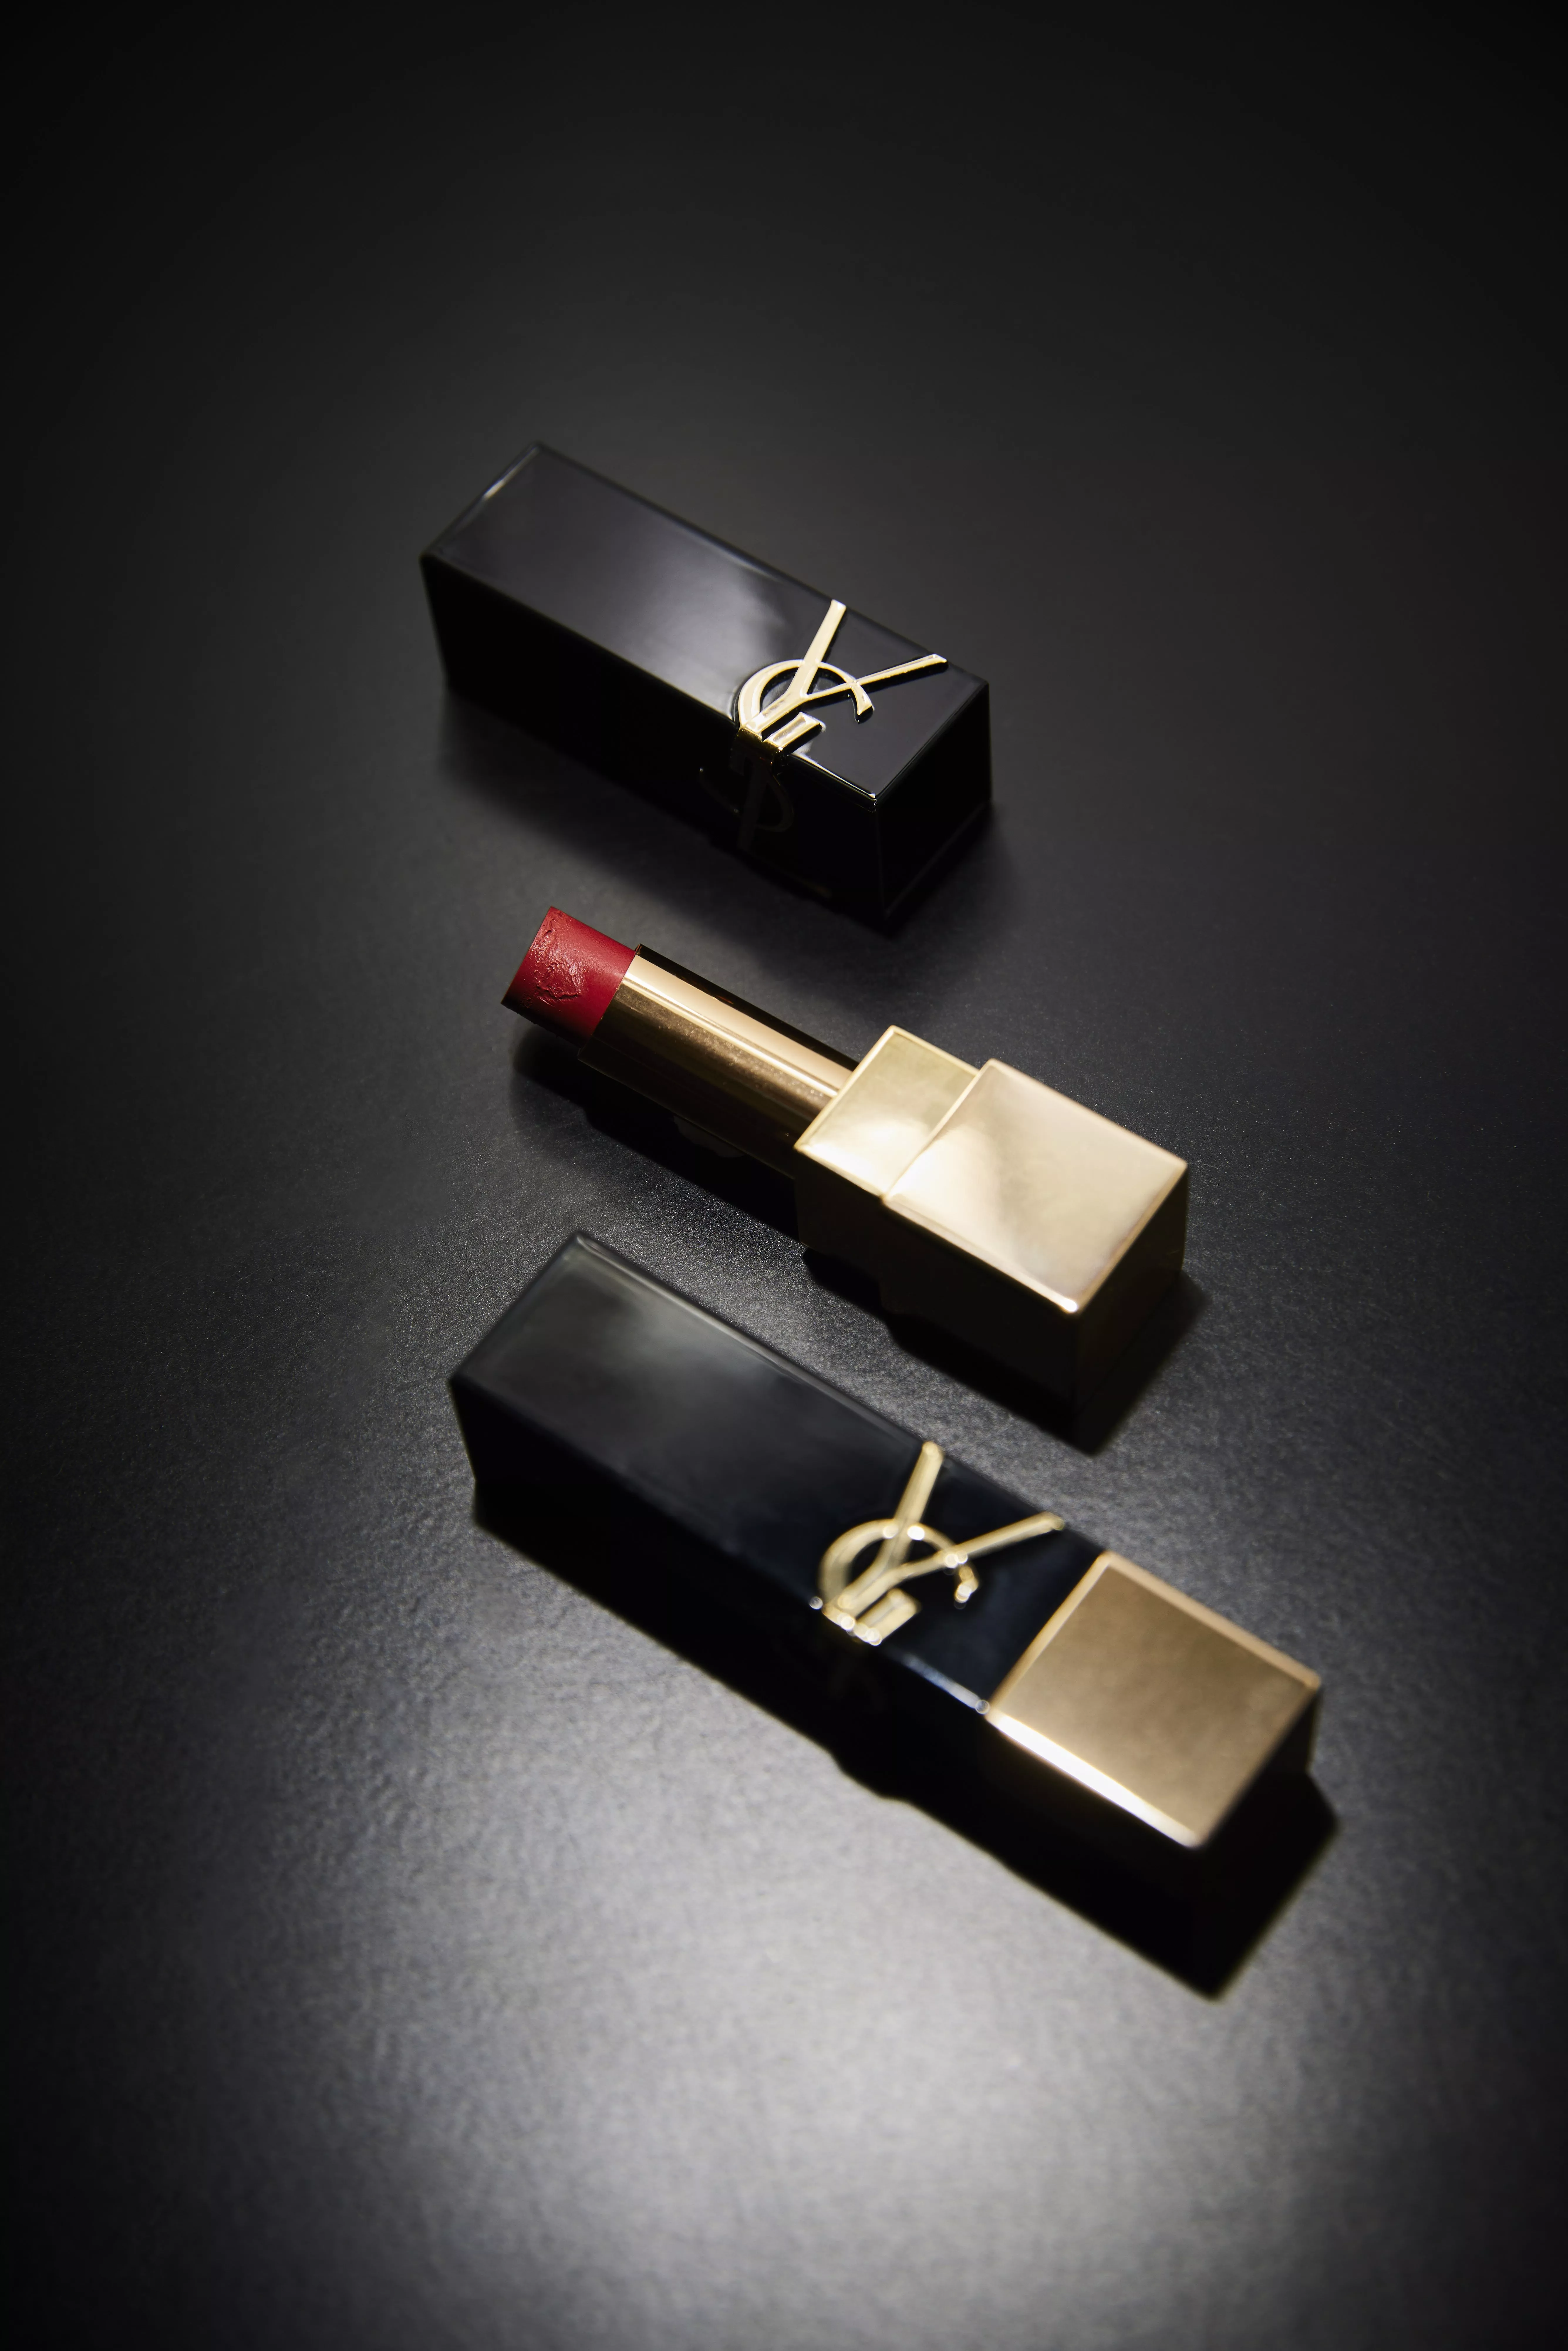 Yves Saint Laurent تطلق أحمر الشفاه The Bold من مجموعة Rouge Pur Couture